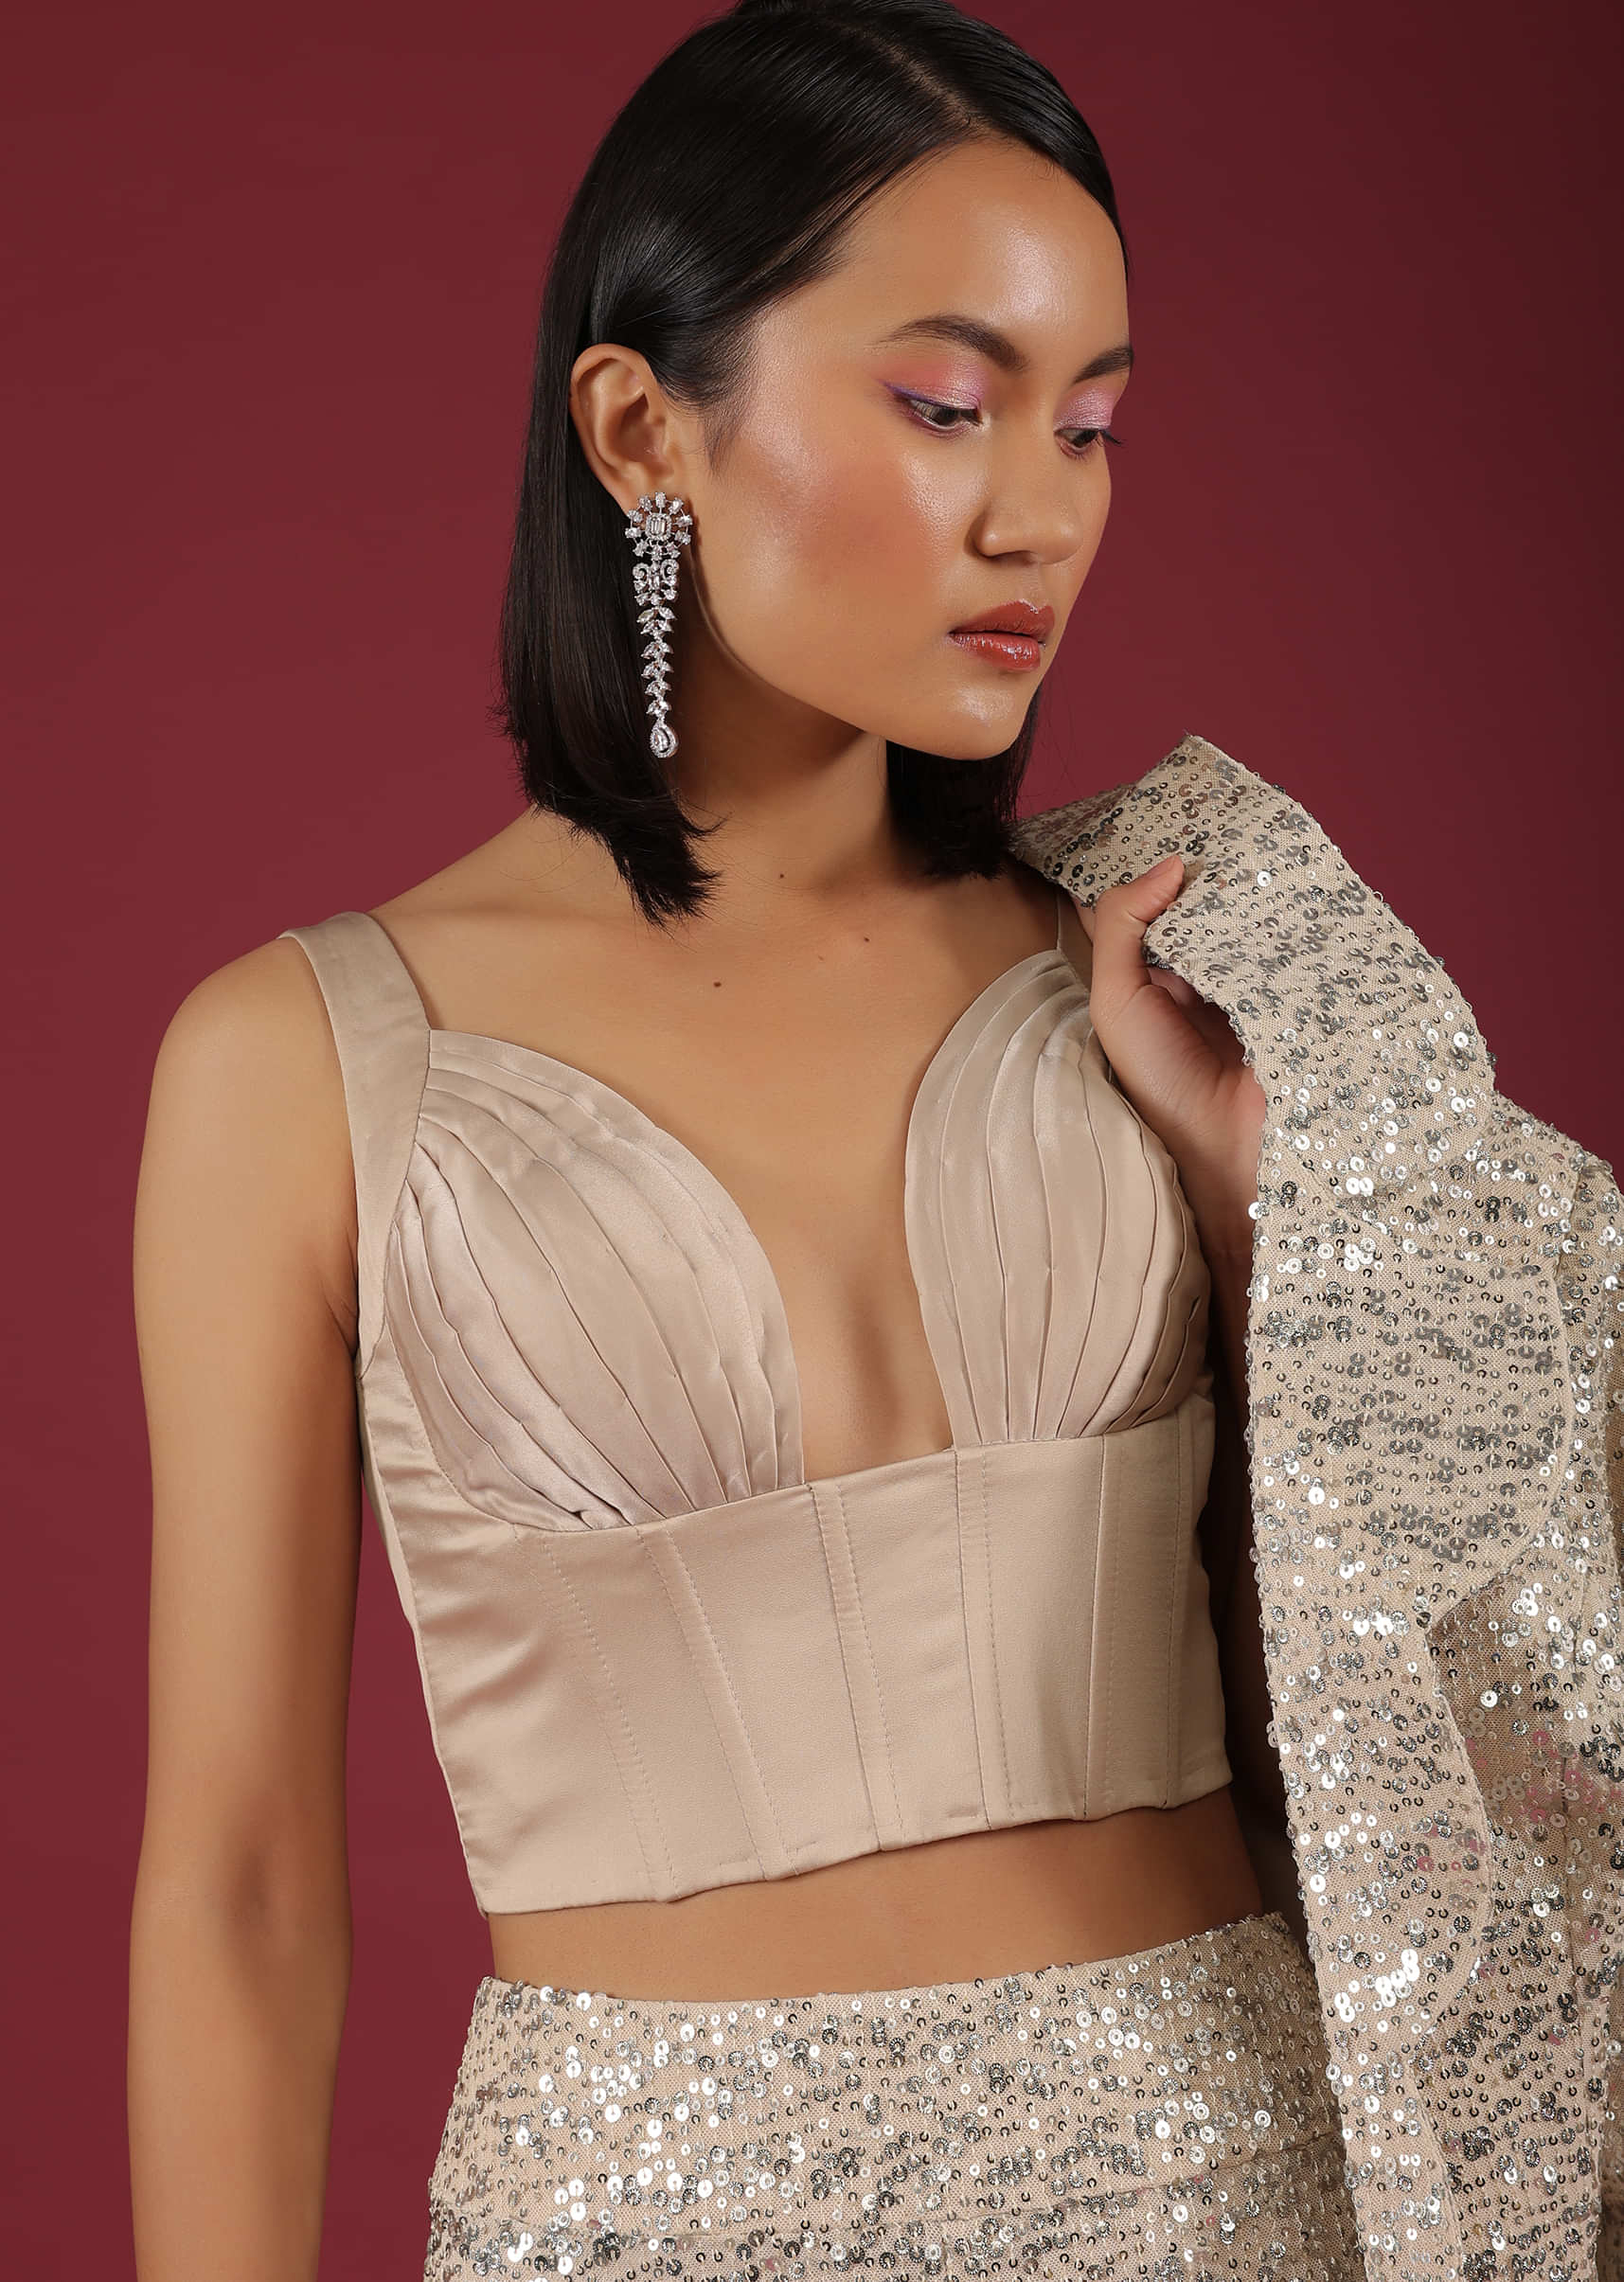 Sandshell Cream Blazer Jacket And Cigarette Pant Set In Sequins Embroidery With A Satin Corset Top